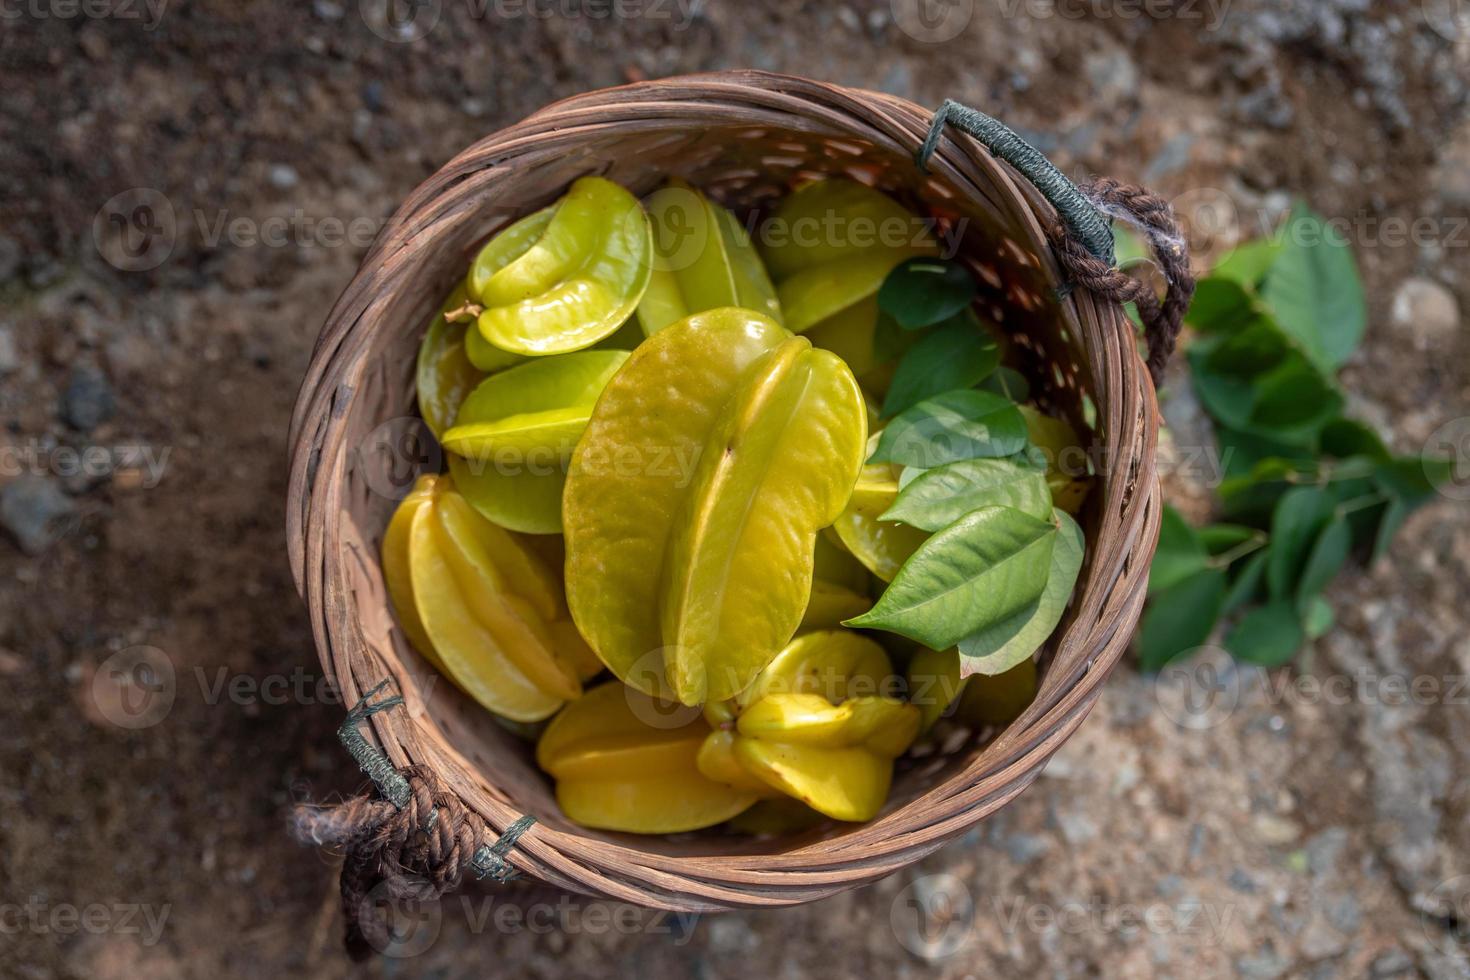 The Yellow carambola is ripe. Pick it and put it in the basket photo